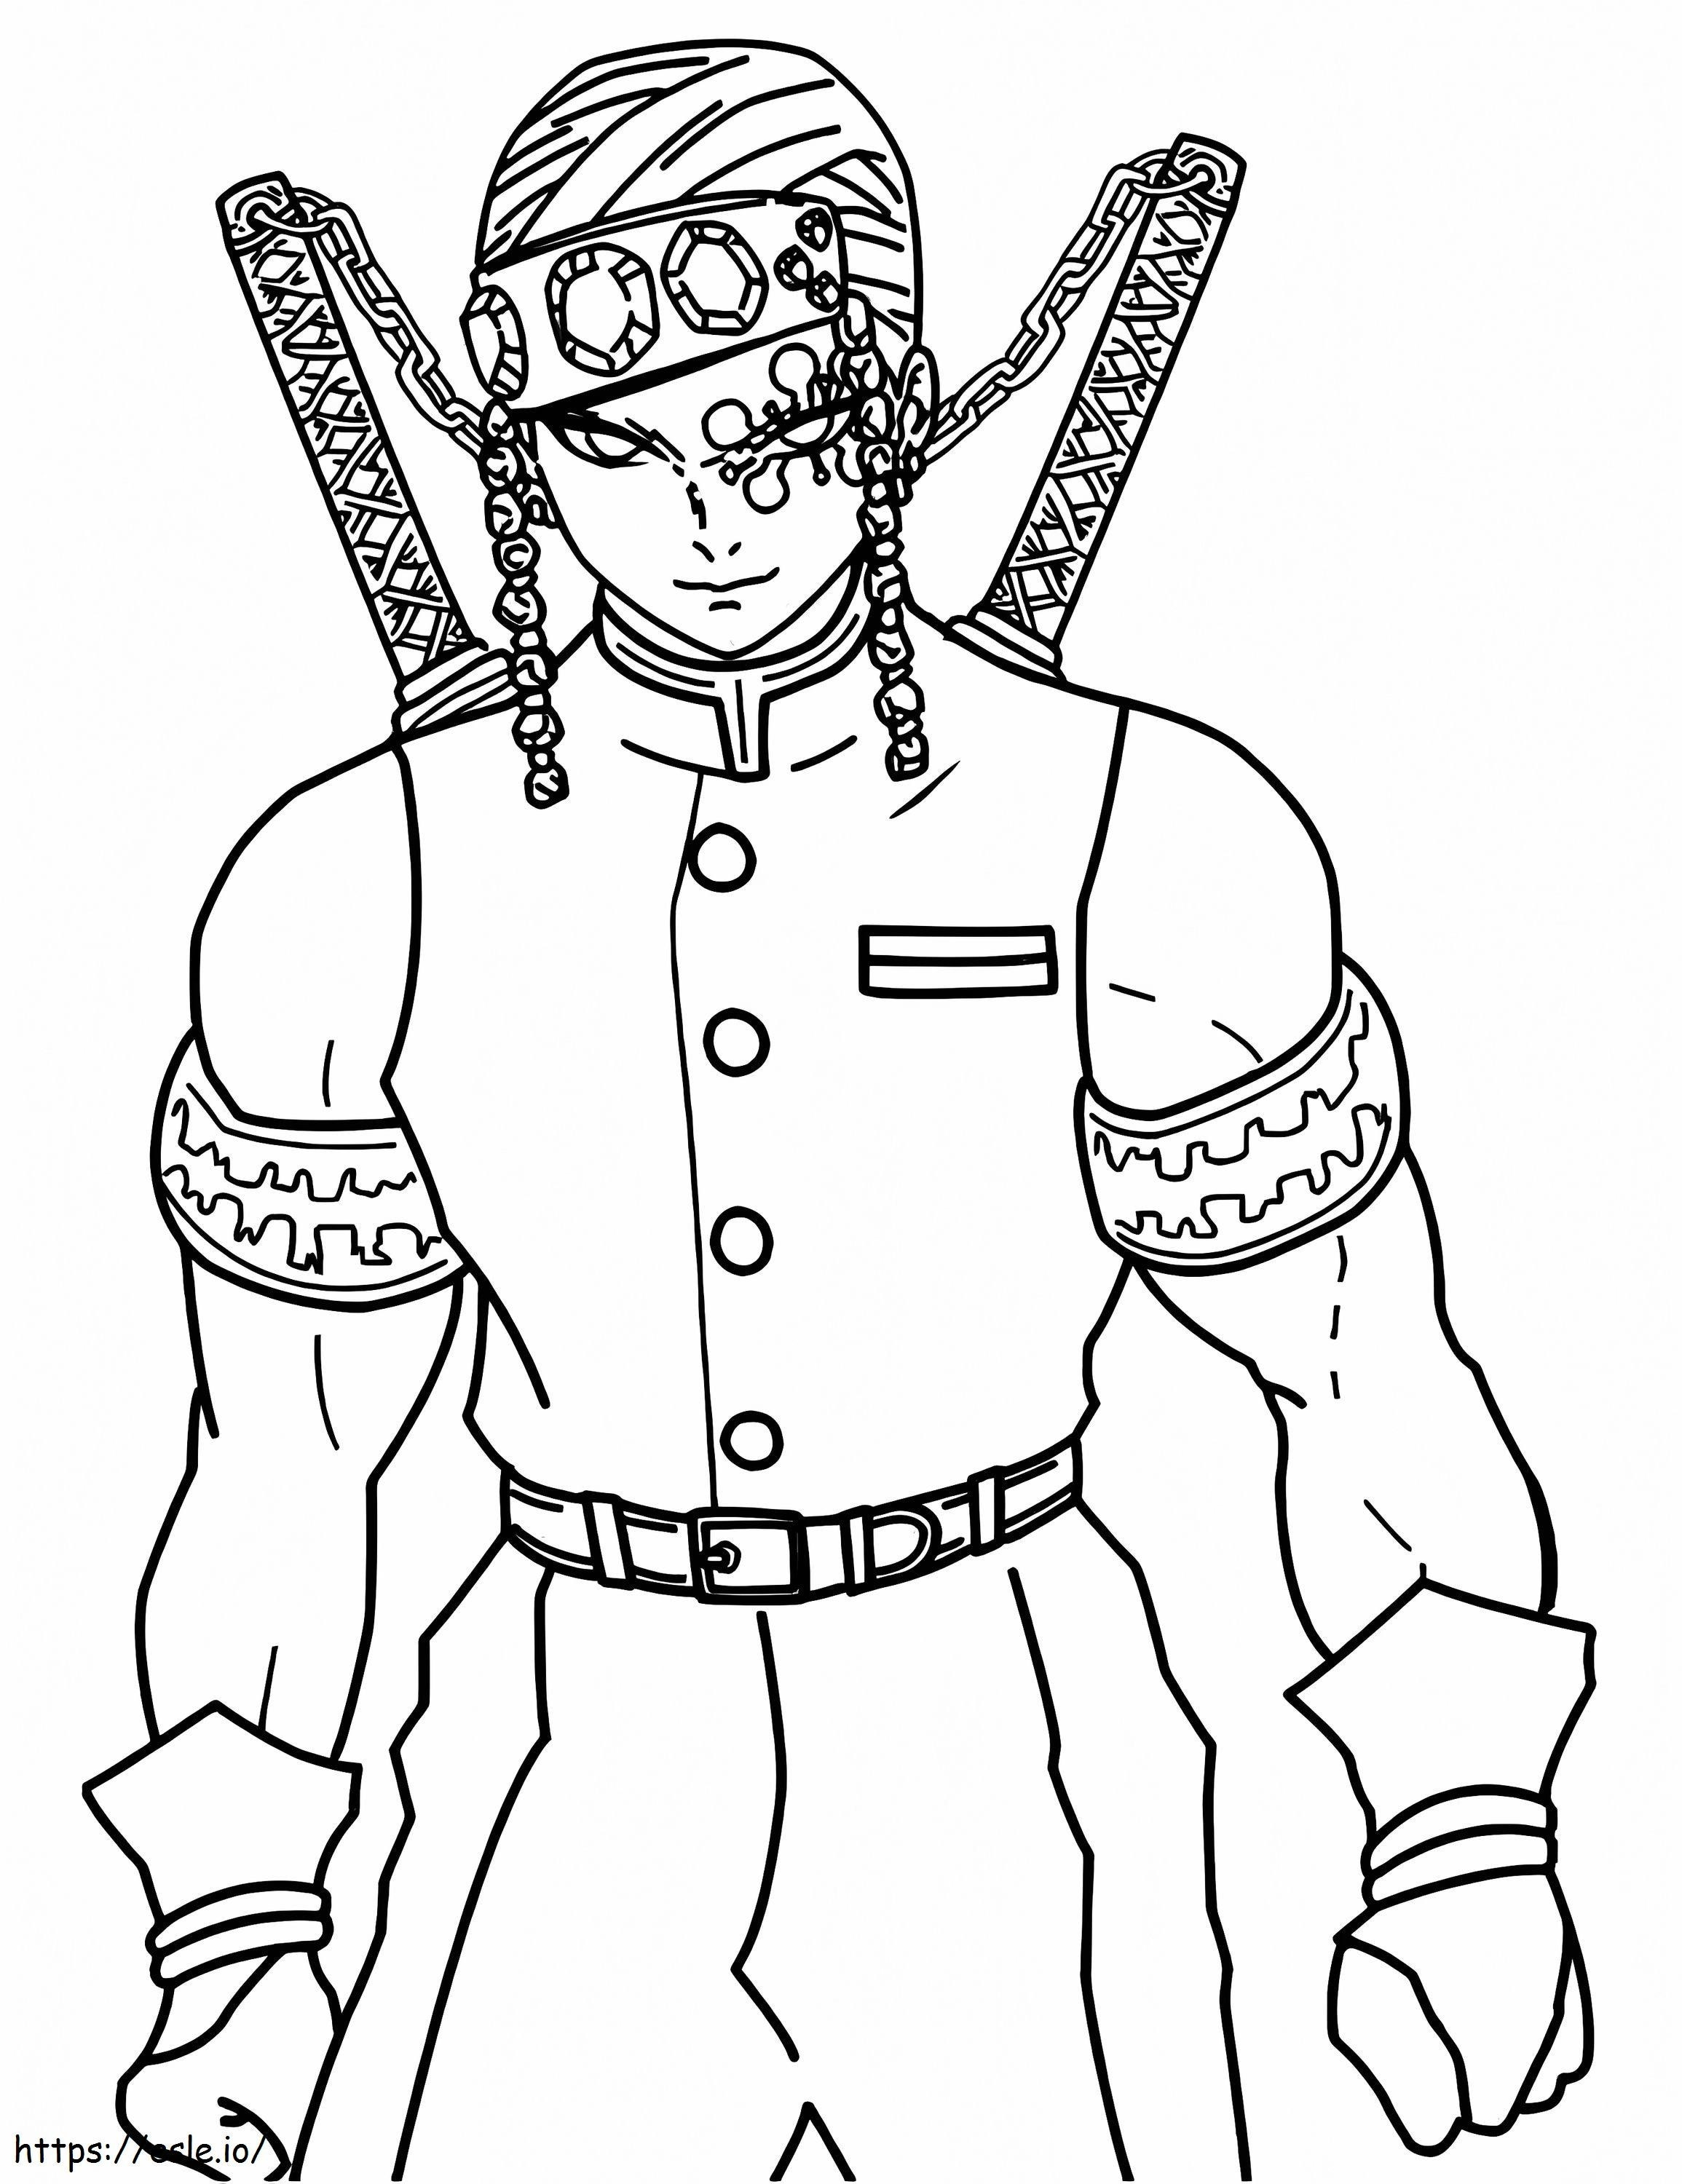 Right Uzui Is Strong coloring page